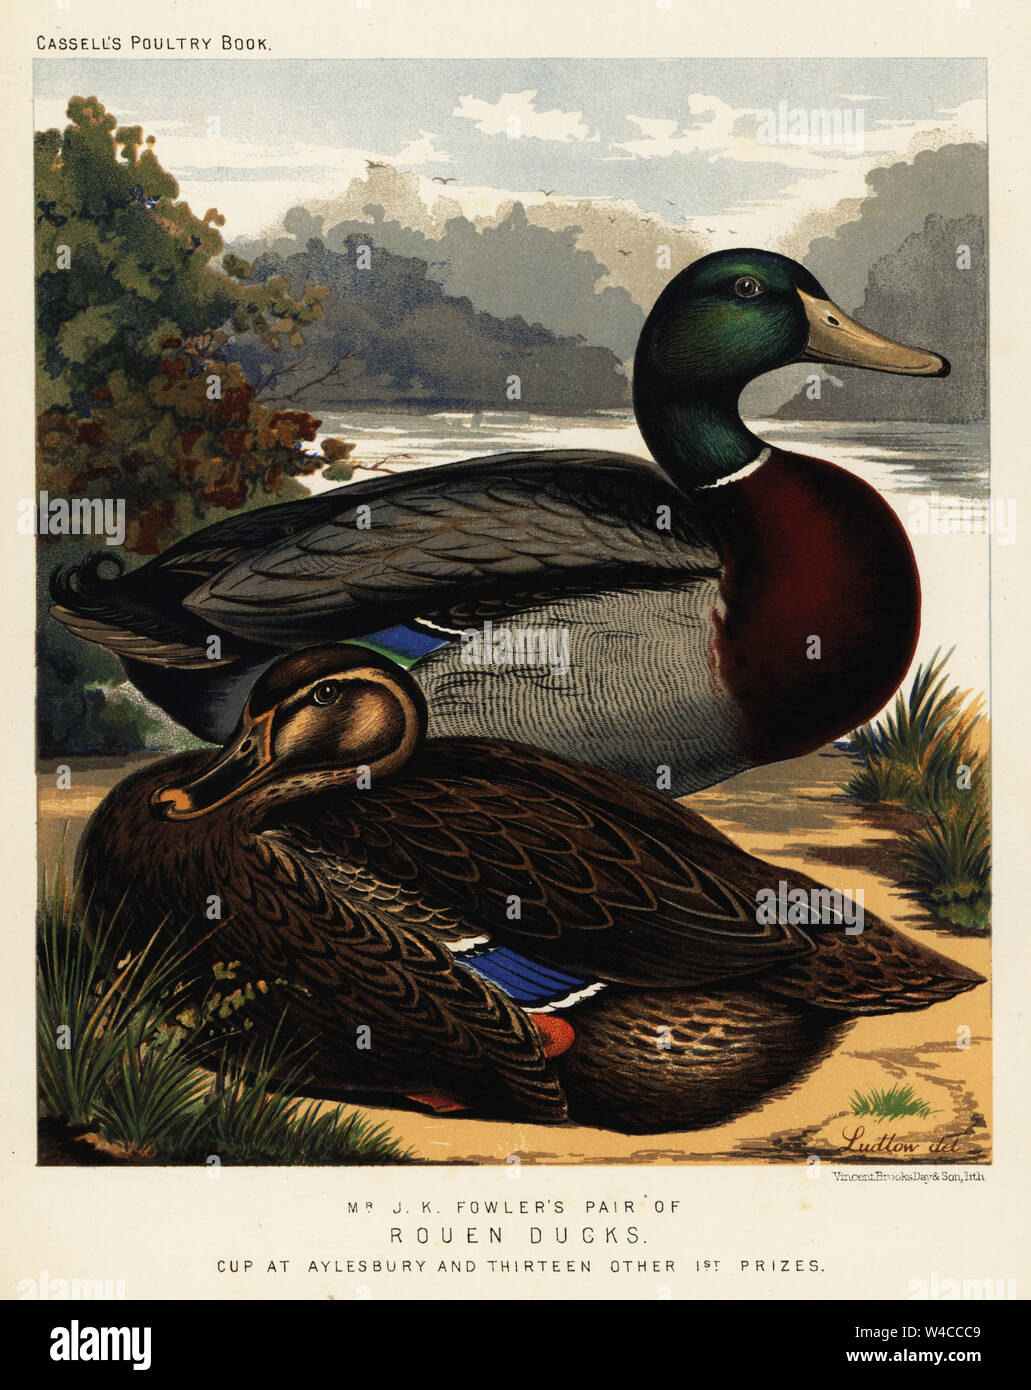 Rouen ducks, Anas platyrhynchos, cock and hen. Bred by J. K. Fowler and winner of cup at Aylesbury. Chromolithograph by Vincent Brooks Day & Son after an illustration by J.W. Ludlow from Lewis Wright’s The Illustrated Book of Poultry, Cassell, London, 1890. Stock Photo